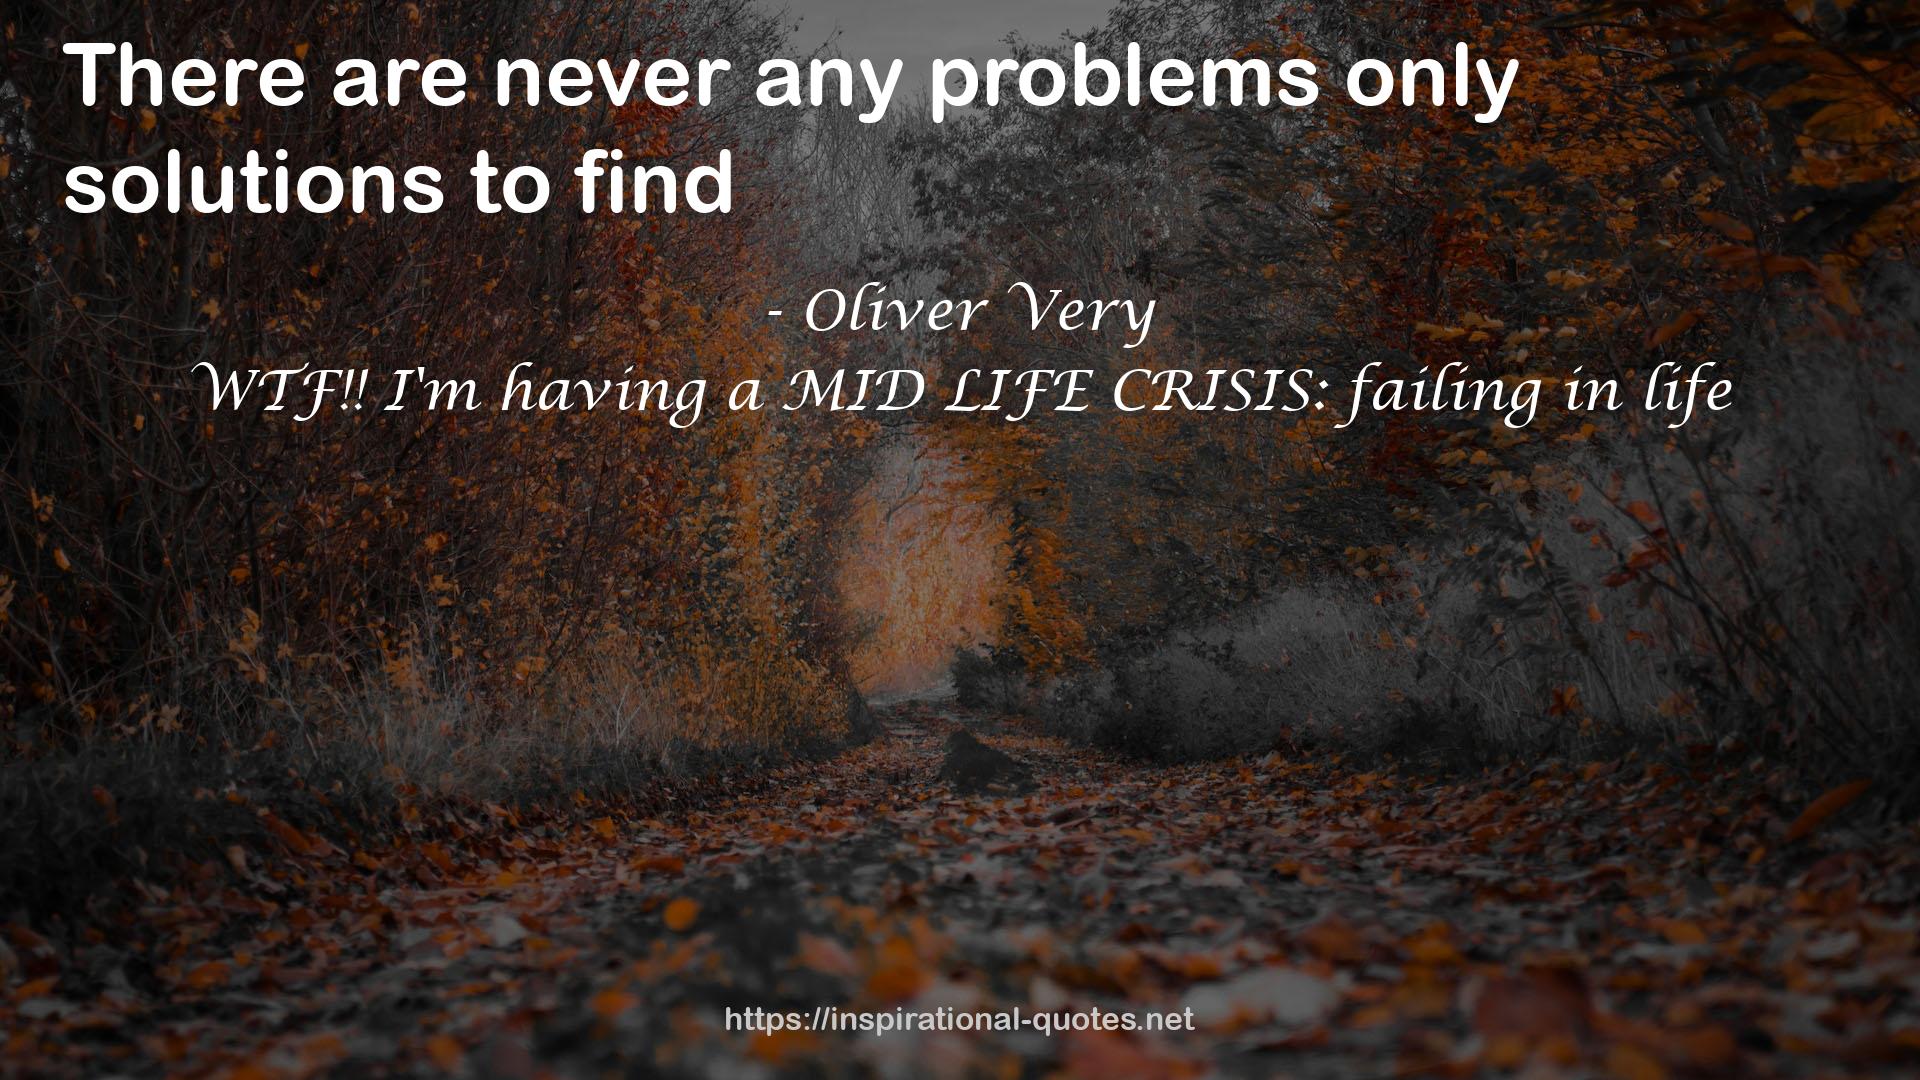 WTF!! I'm having a MID LIFE CRISIS: failing in life QUOTES